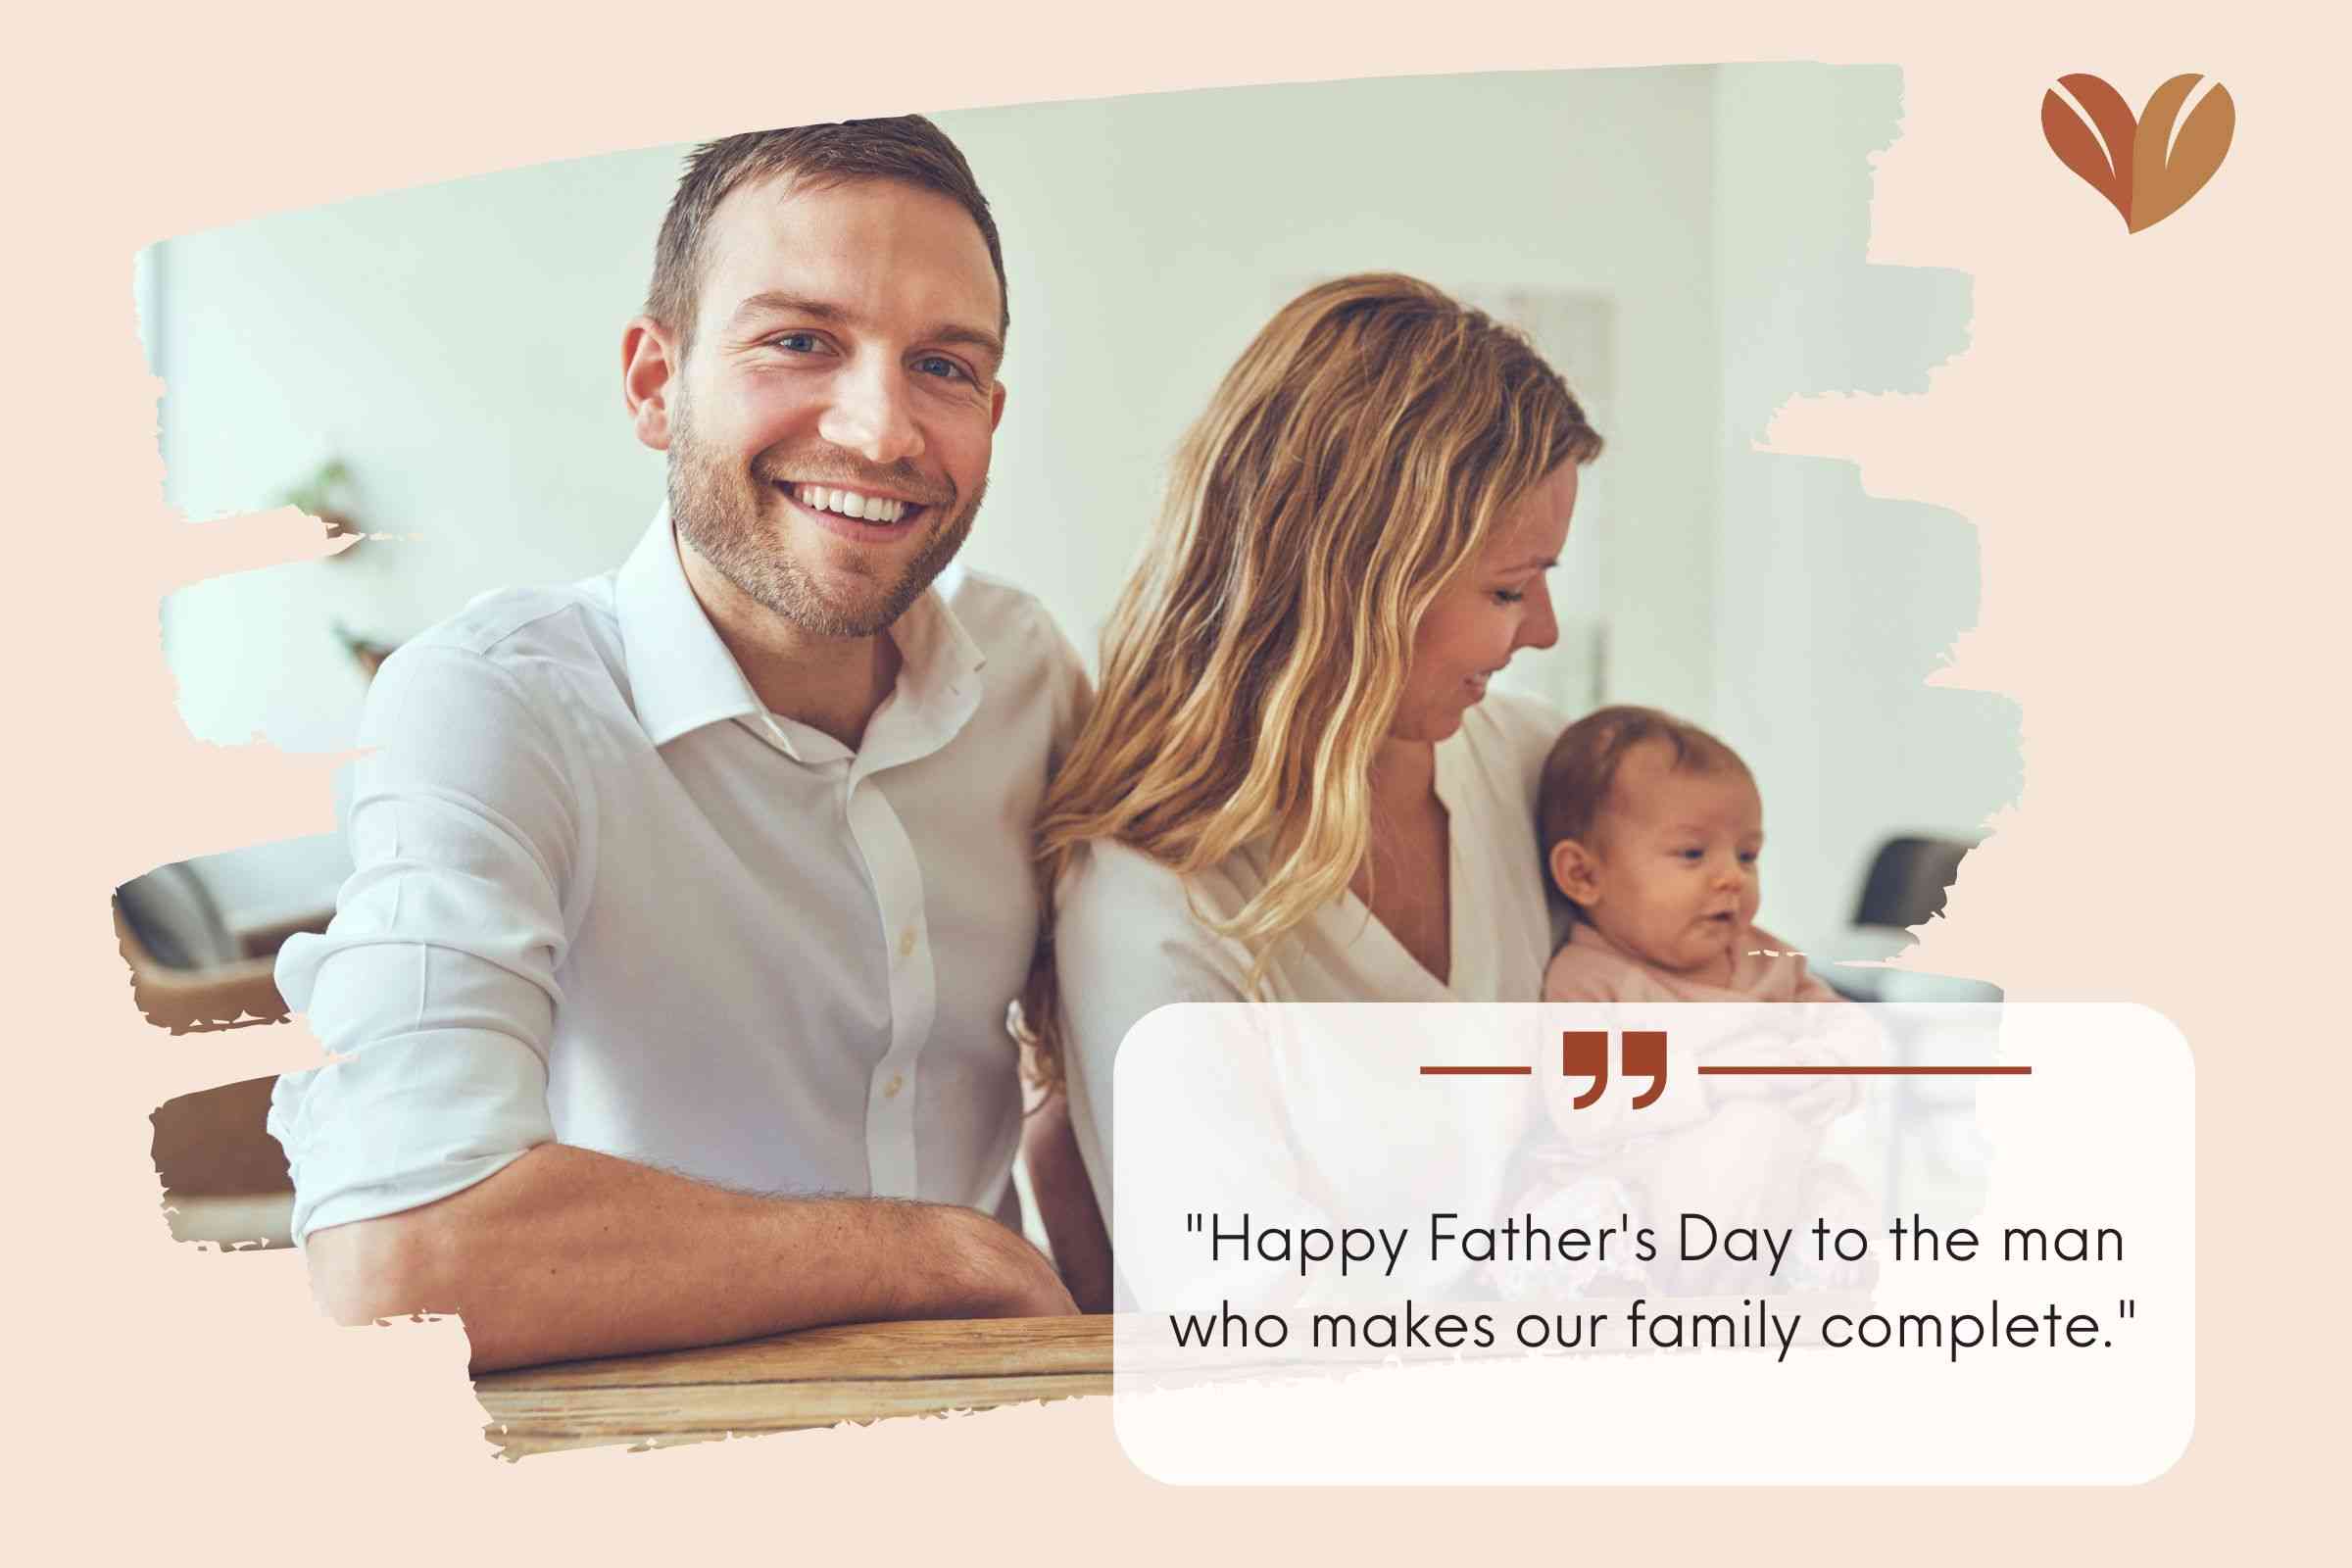 Long-Distance Father's Day Greetings from Wife